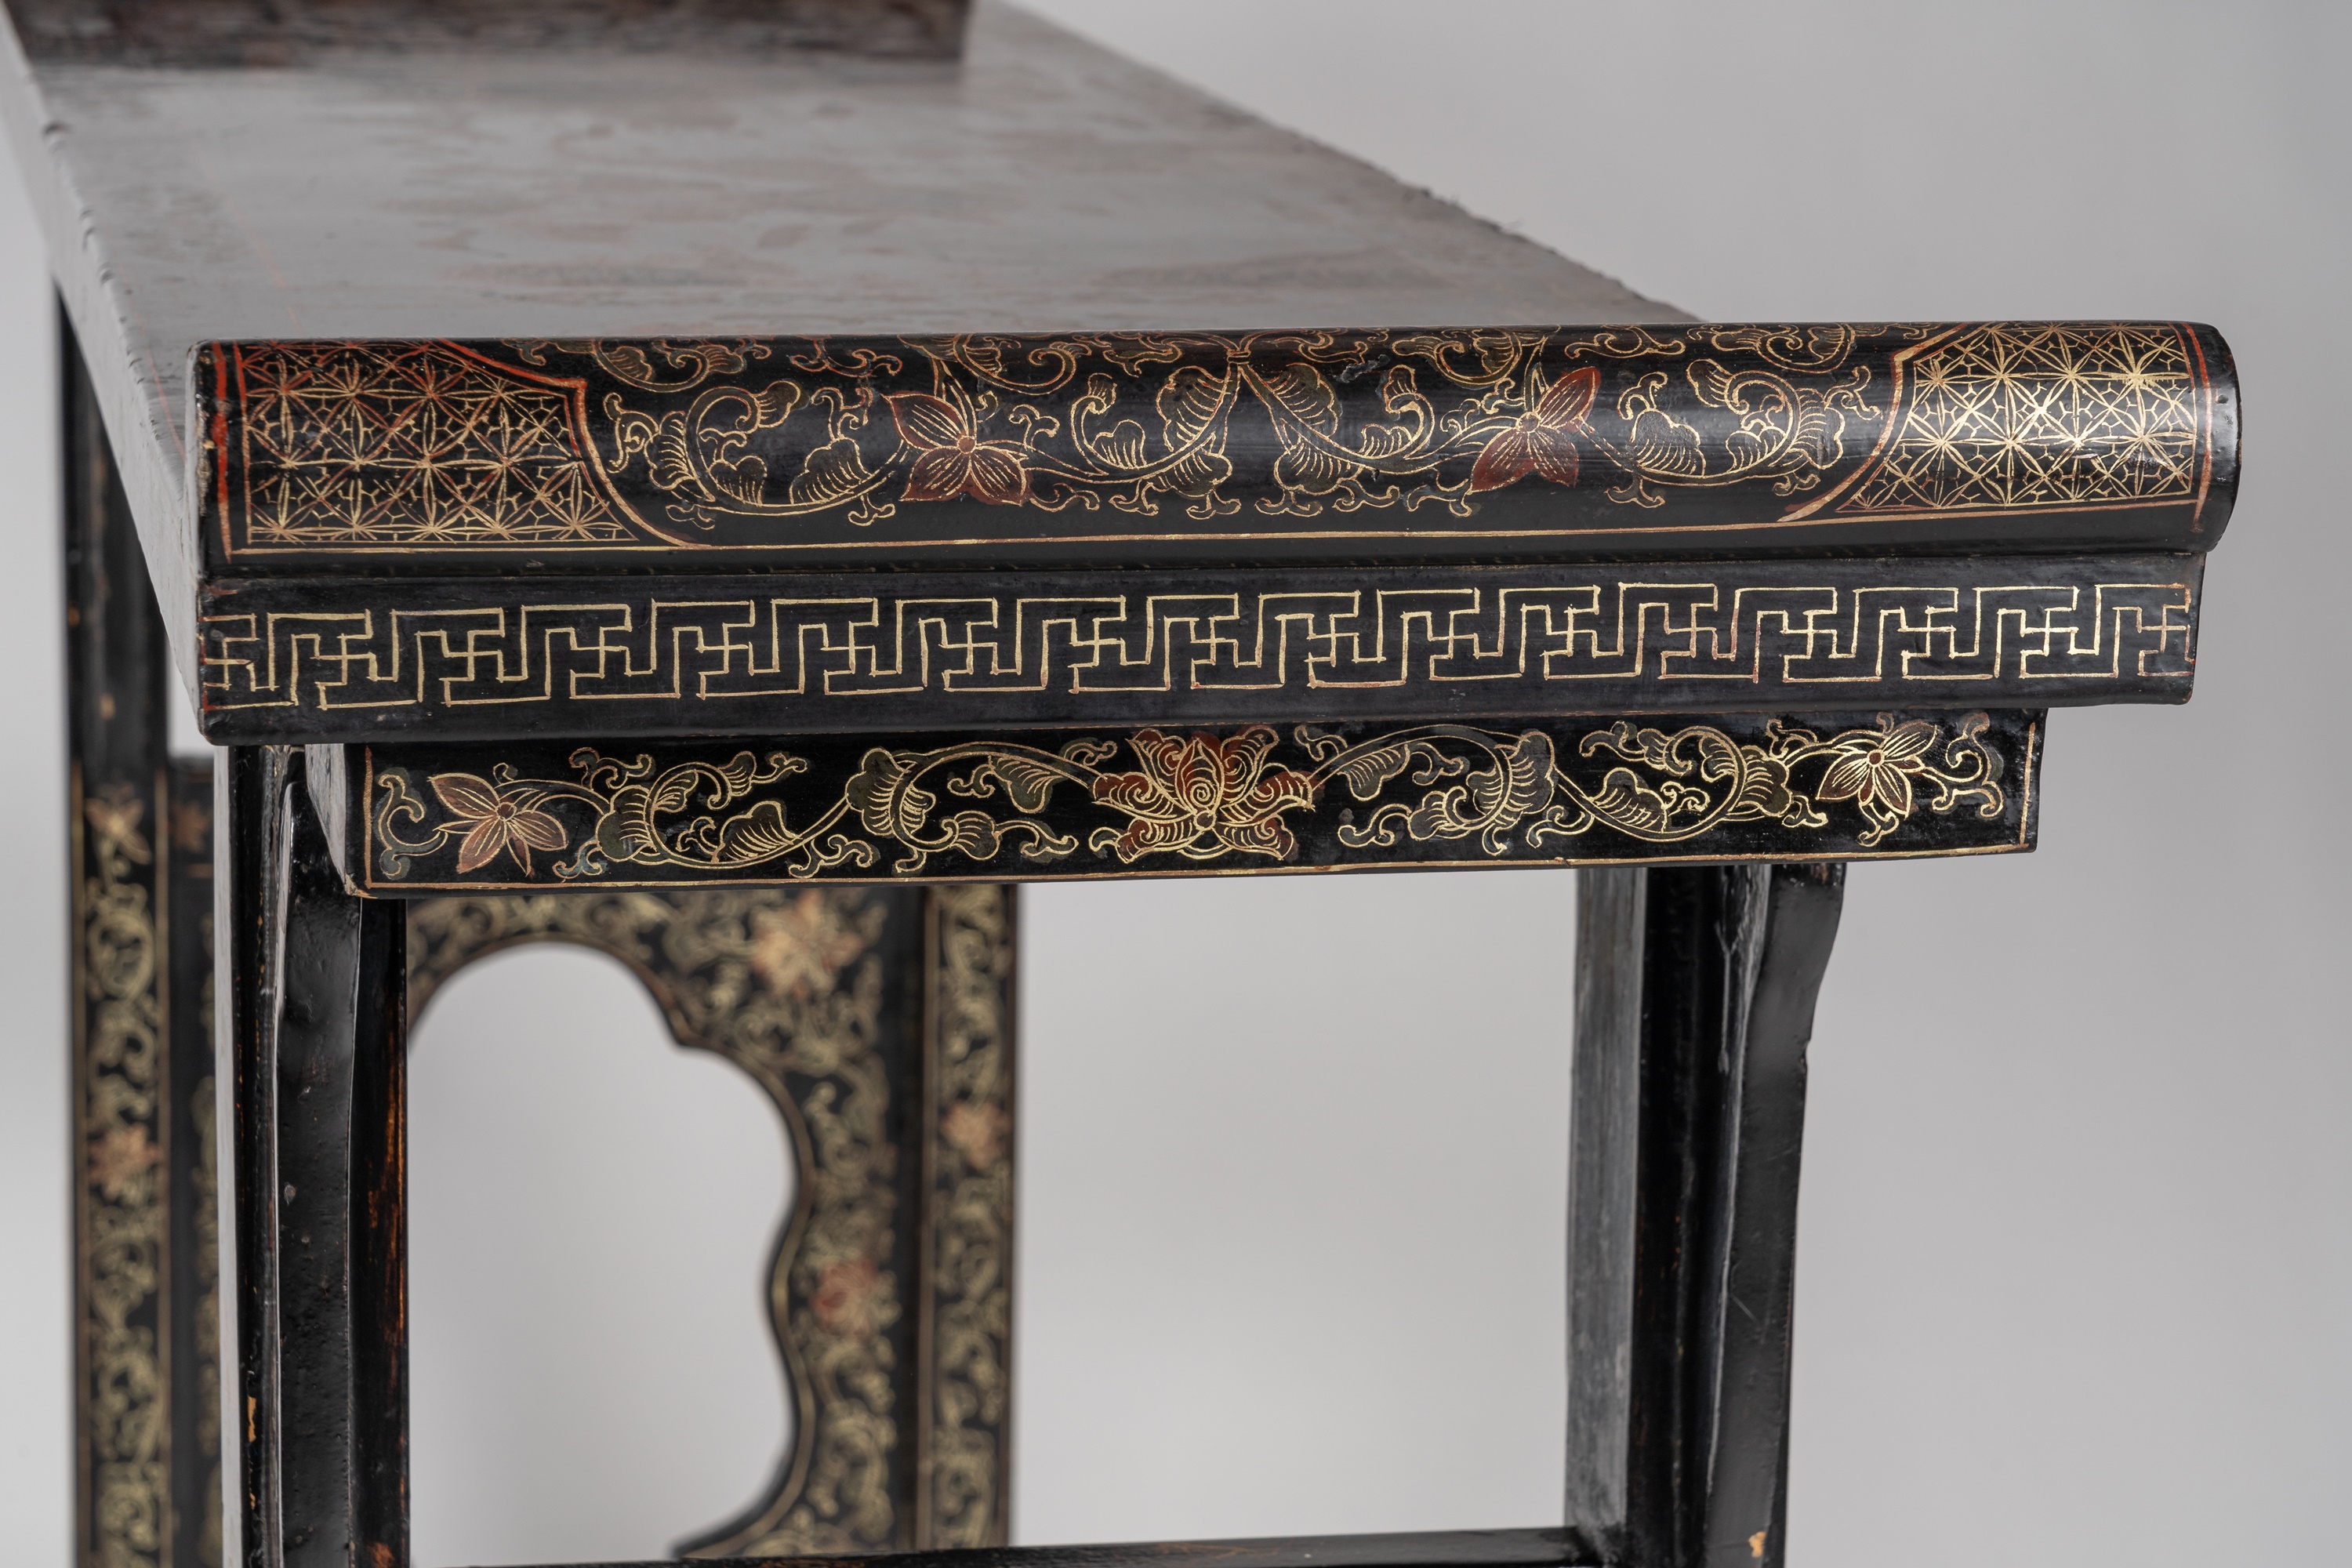 A CHINESE LACQUERED ALTAR TABLE, QING - Image 9 of 11